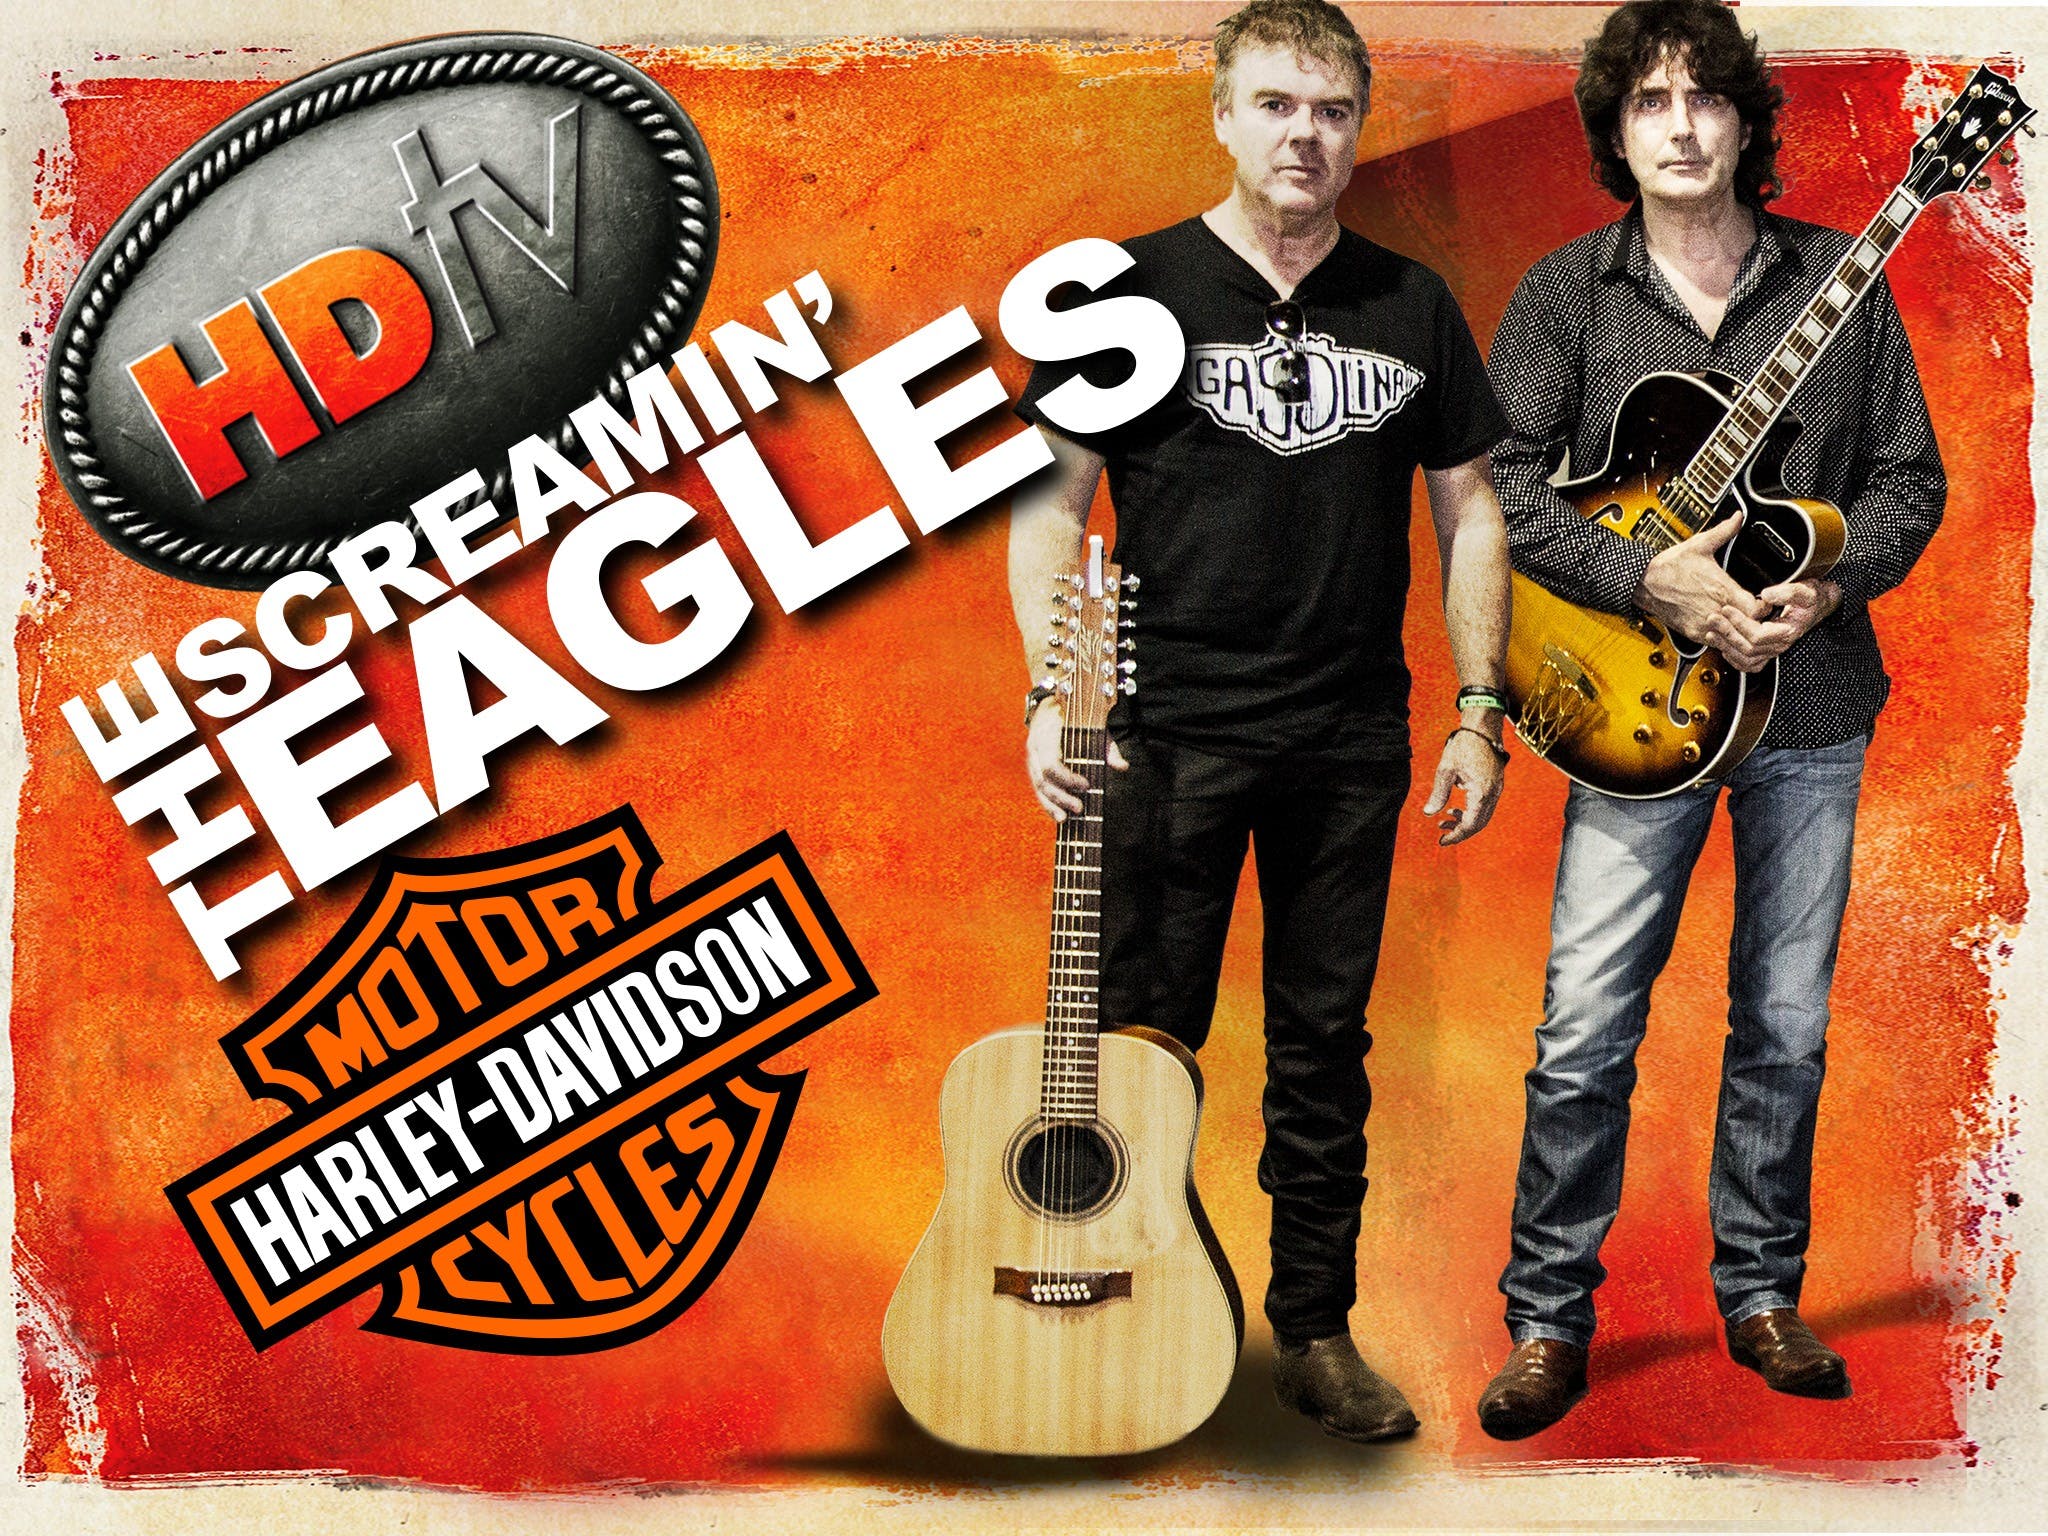 The Screamin' Eagles perform live and free at the Mulwala Water Ski Club